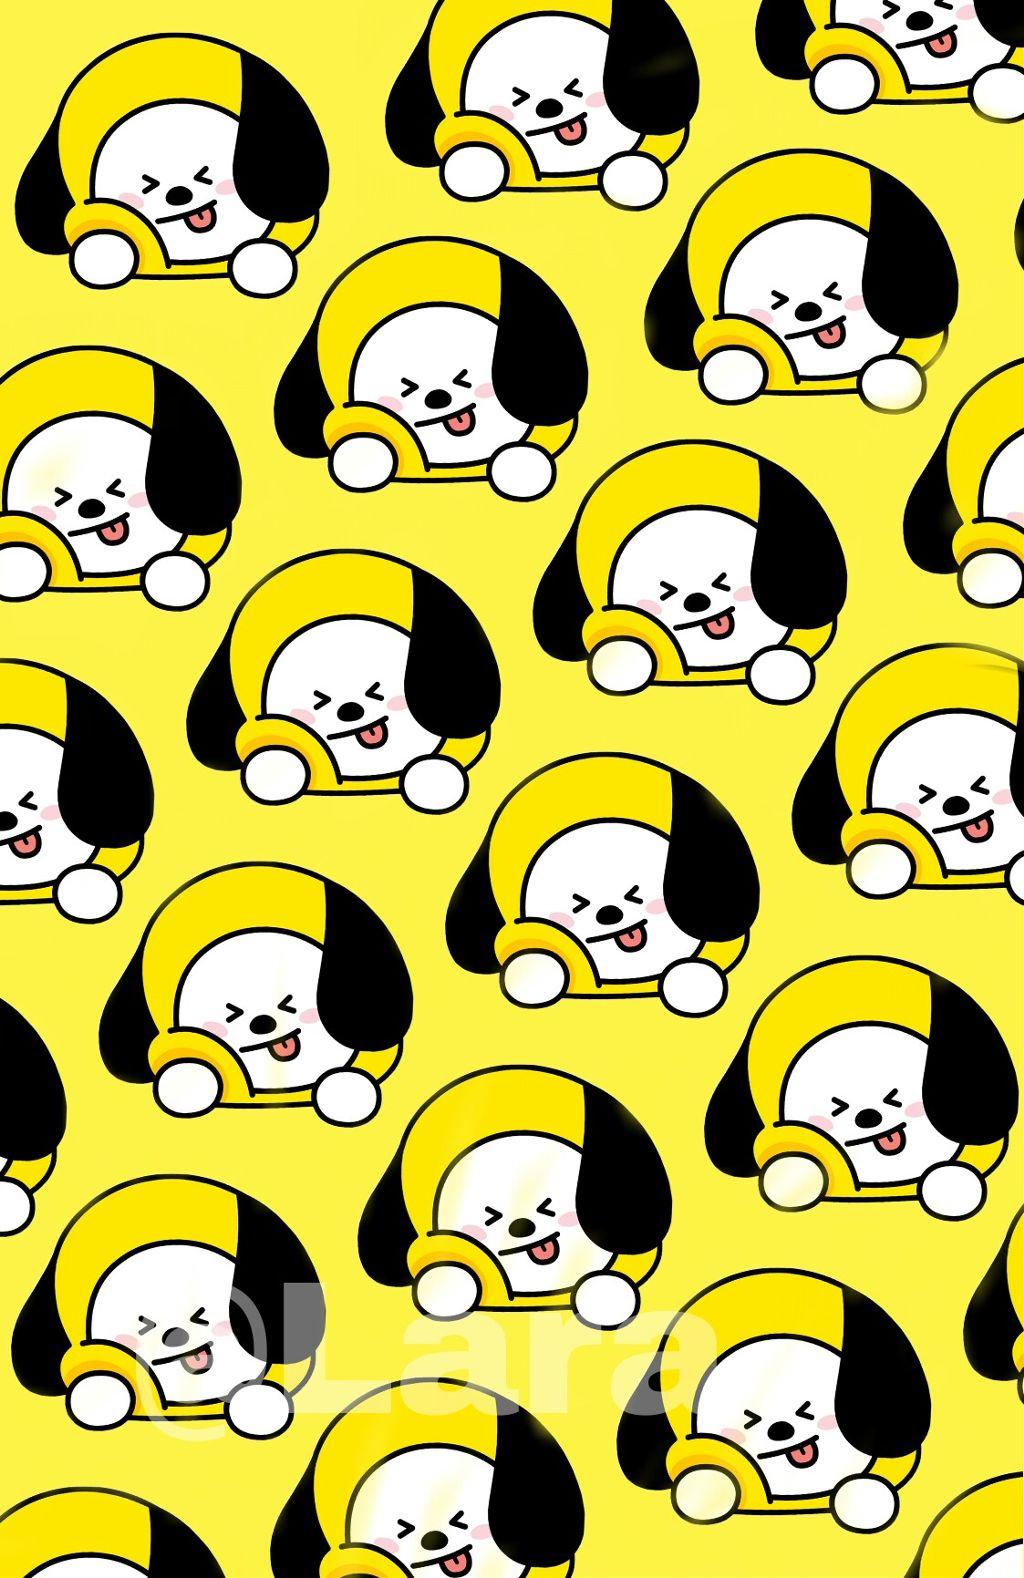 Chimmy Wallpapers  Wallpaper  Cave